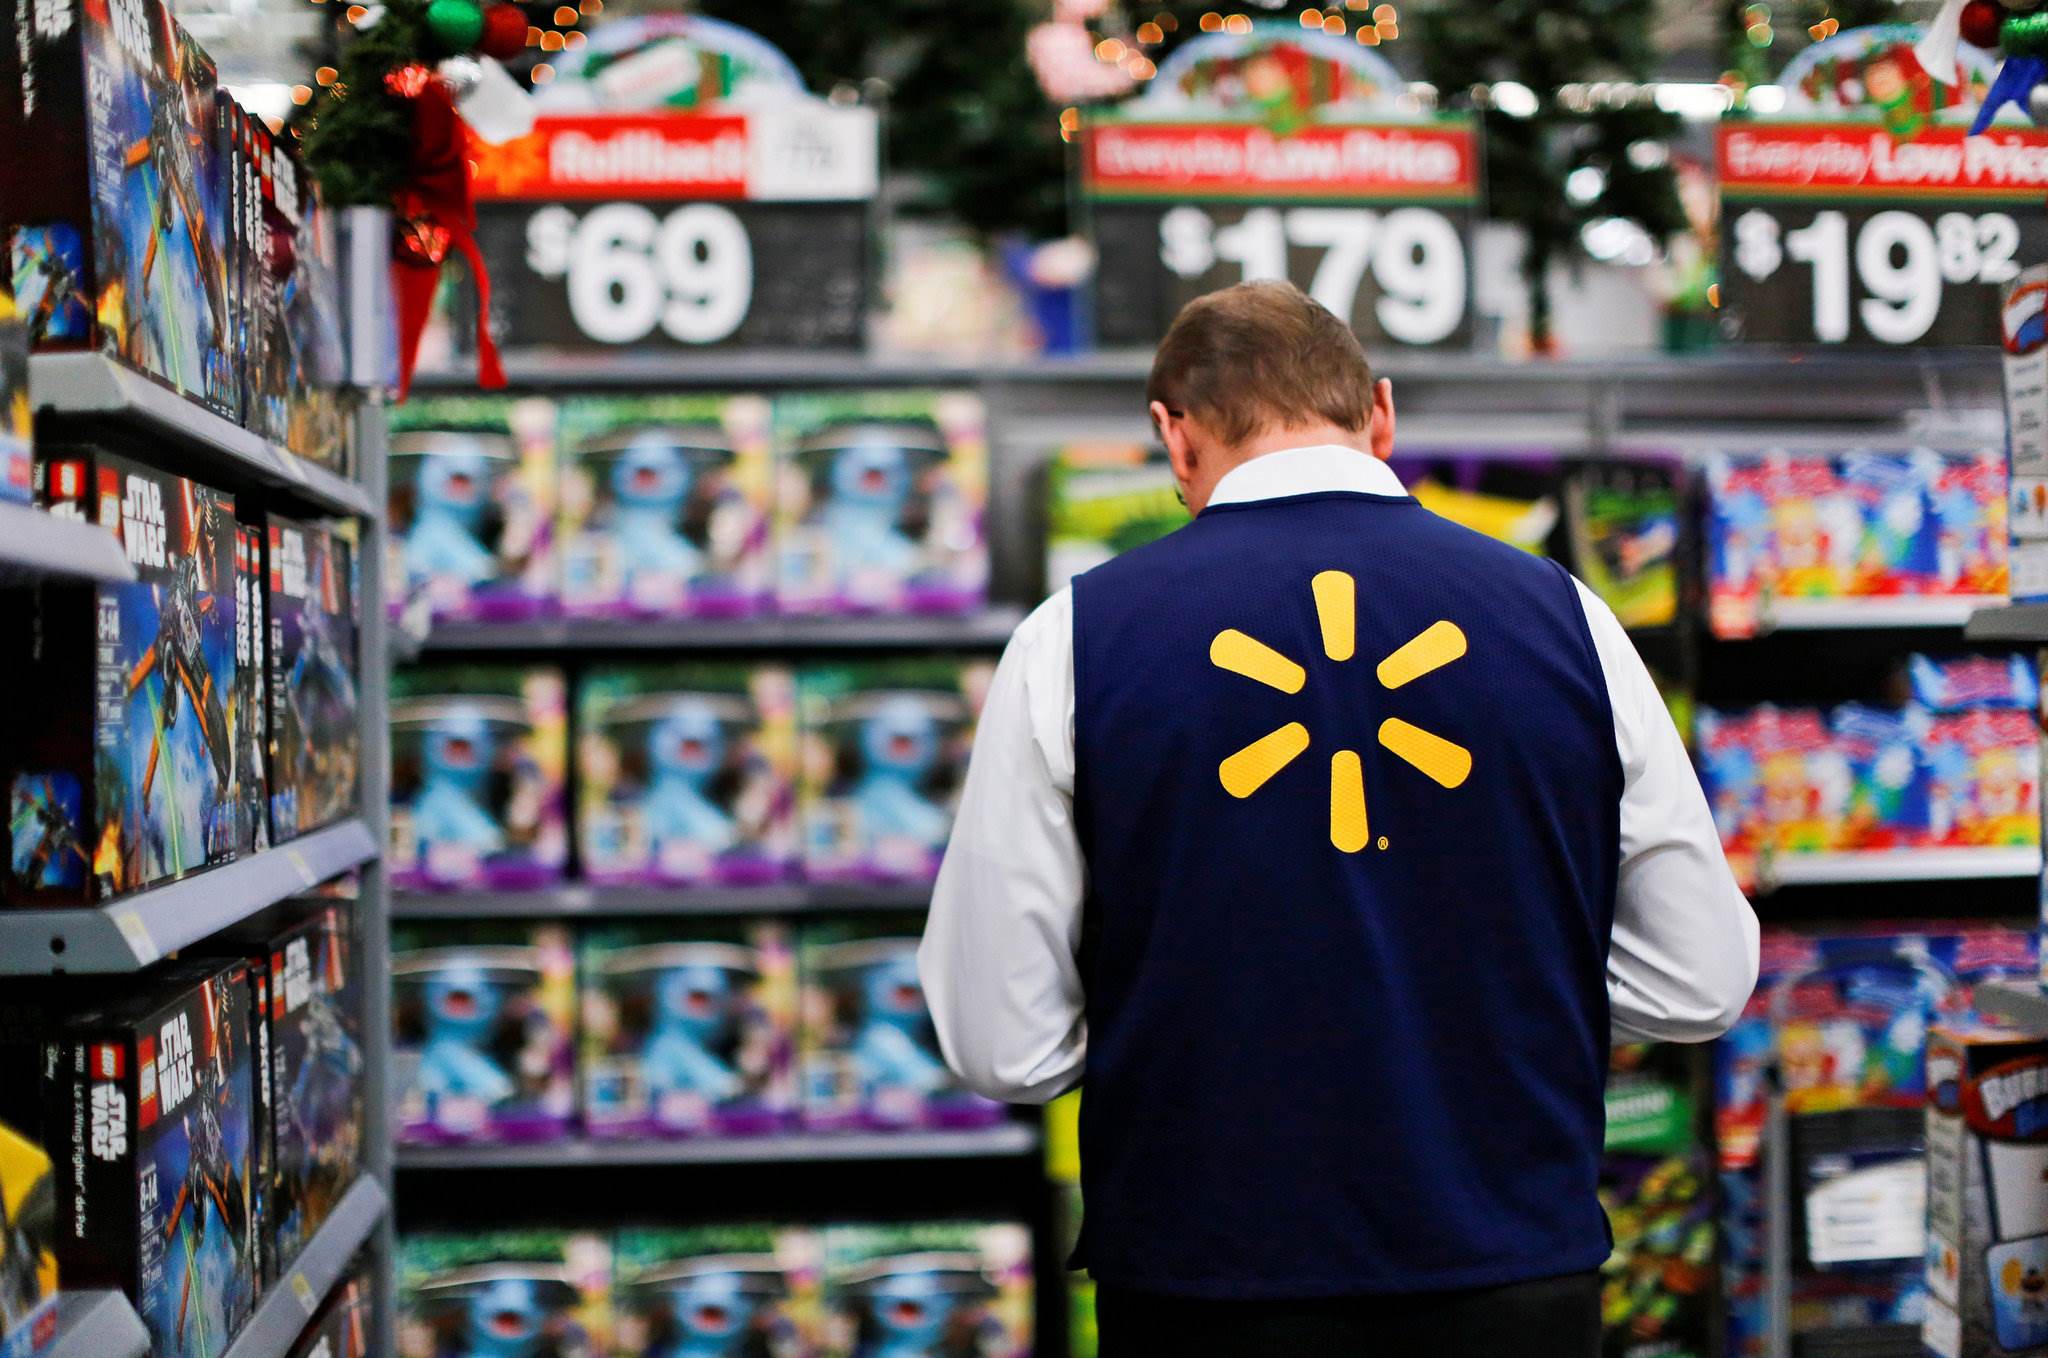 Discover The Secret Hours Of Walmart's Overnight Shift!